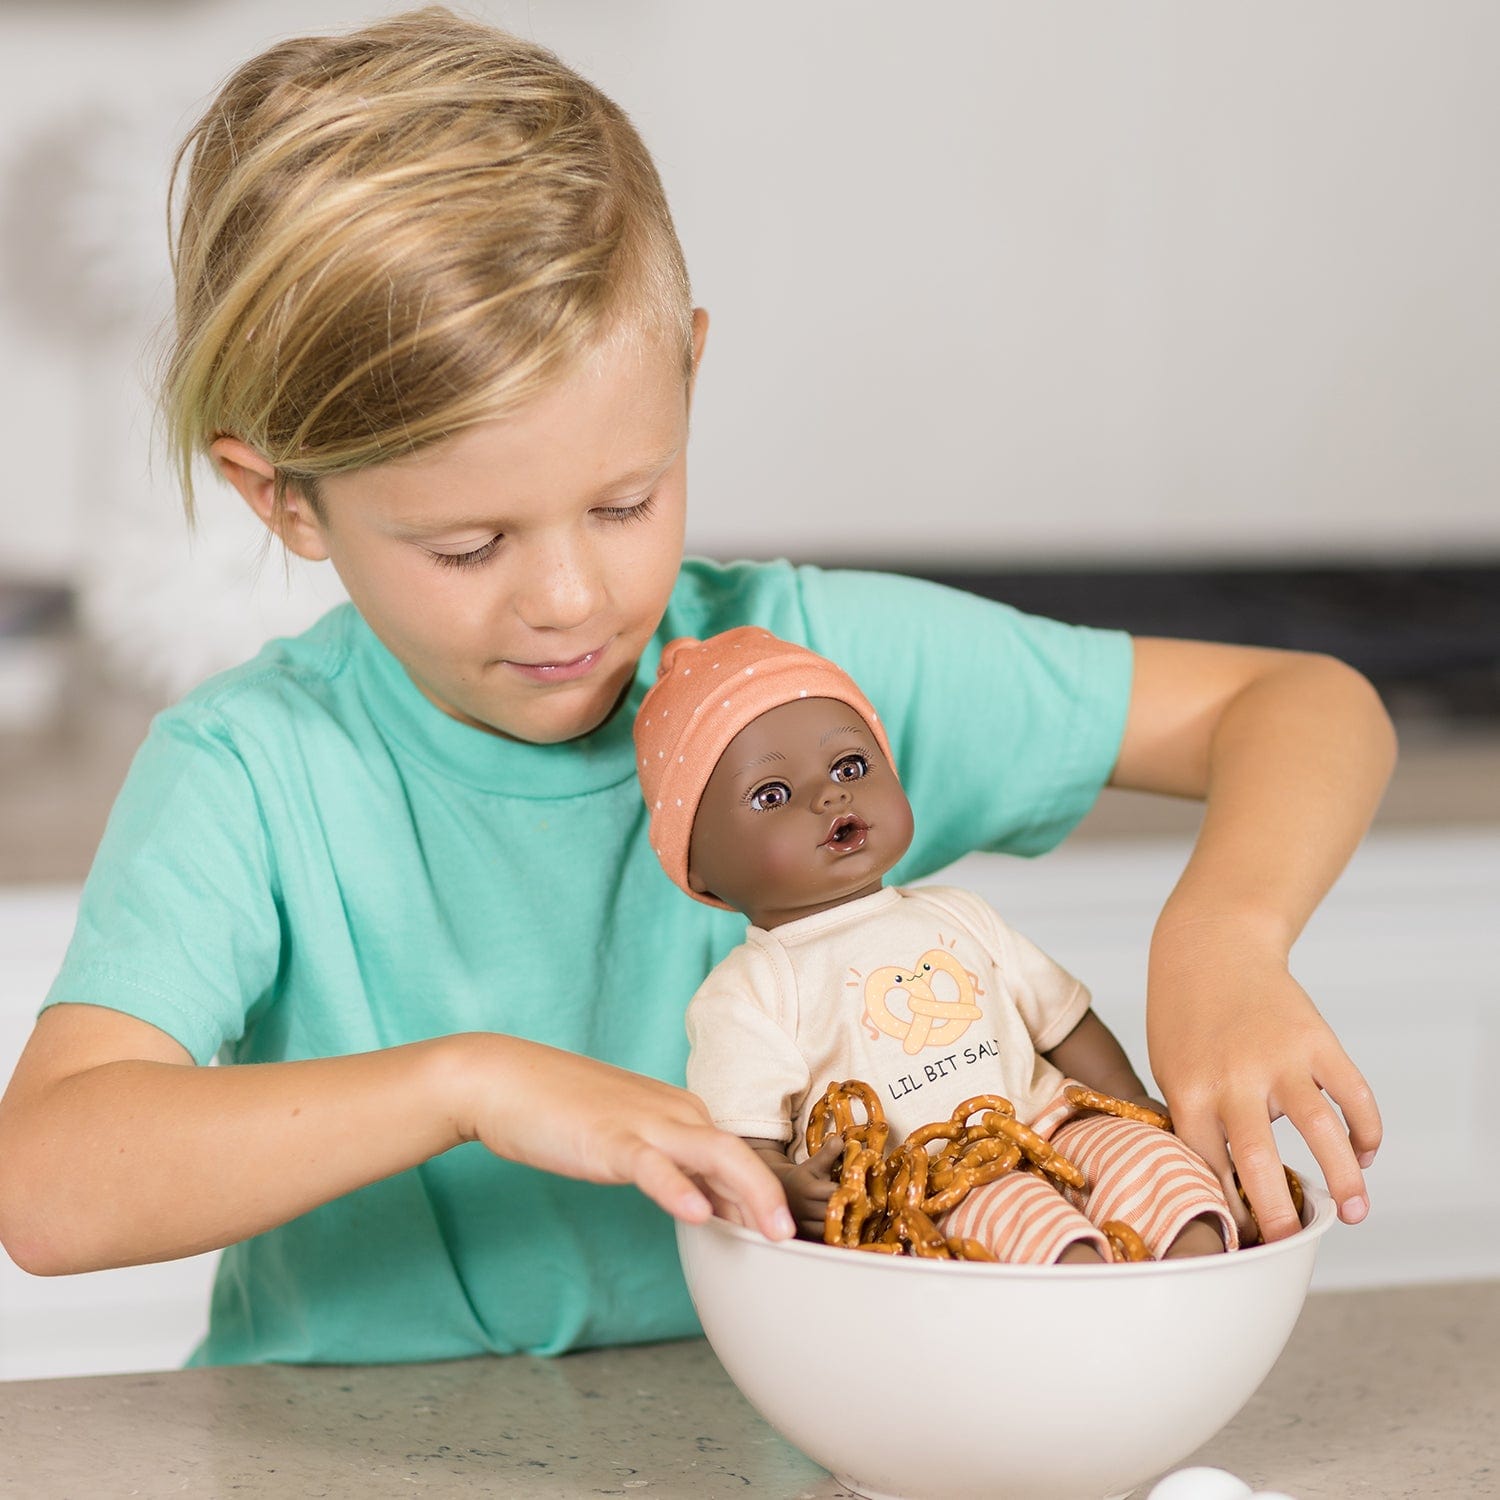 Adora Sweet Pretzel baby doll set includes one 13-inch African American doll, pretzel-printed shirt, pants, matching beanie, blue baby bottle.  Made for Ages 1+.